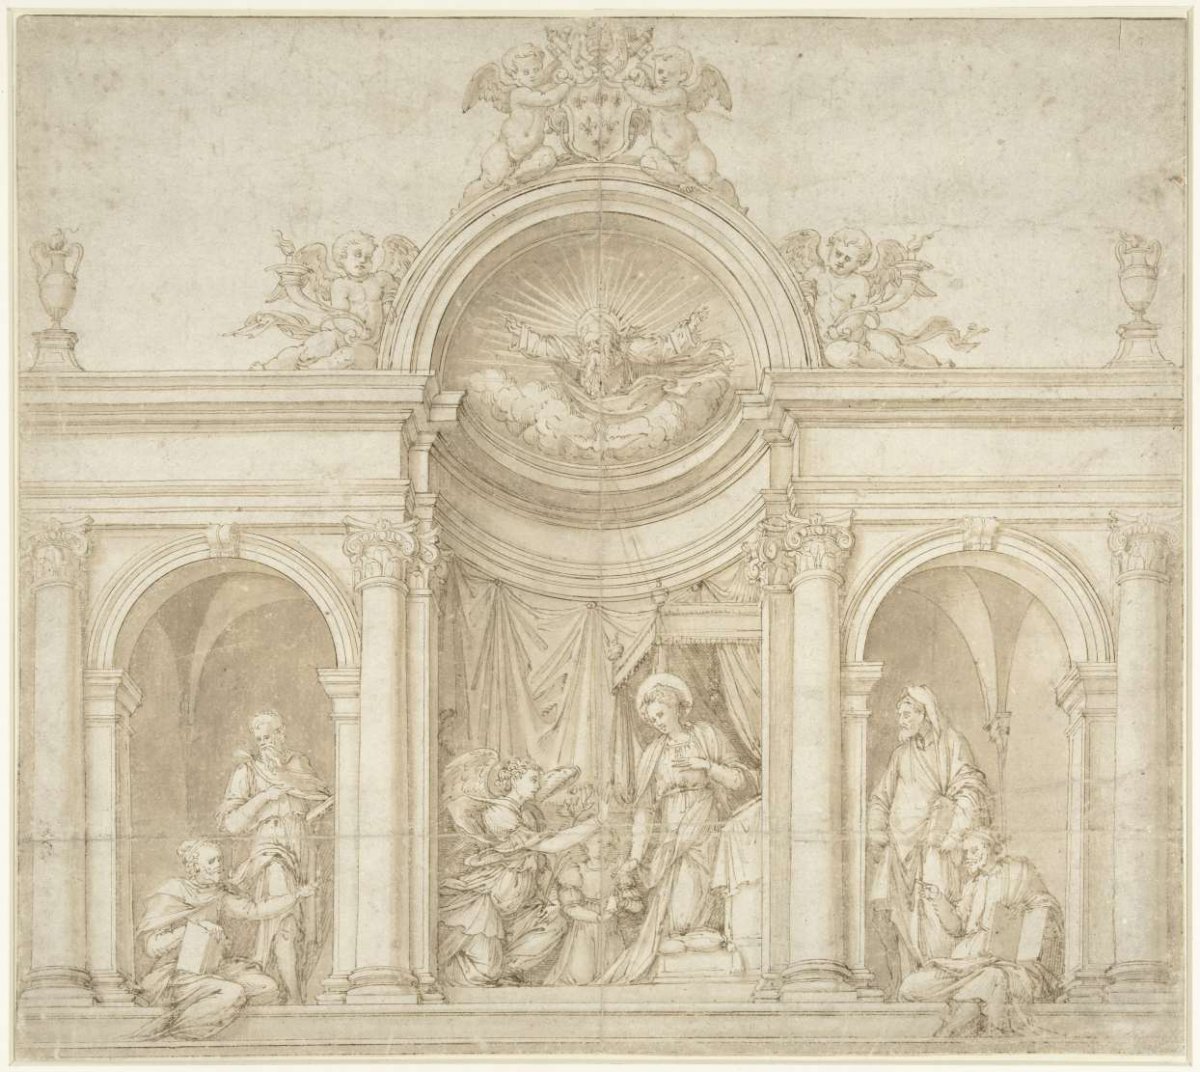 Altarpiece with a Proclamation and on either side two prophets, Baldassare Peruzzi, 1534 - 1549